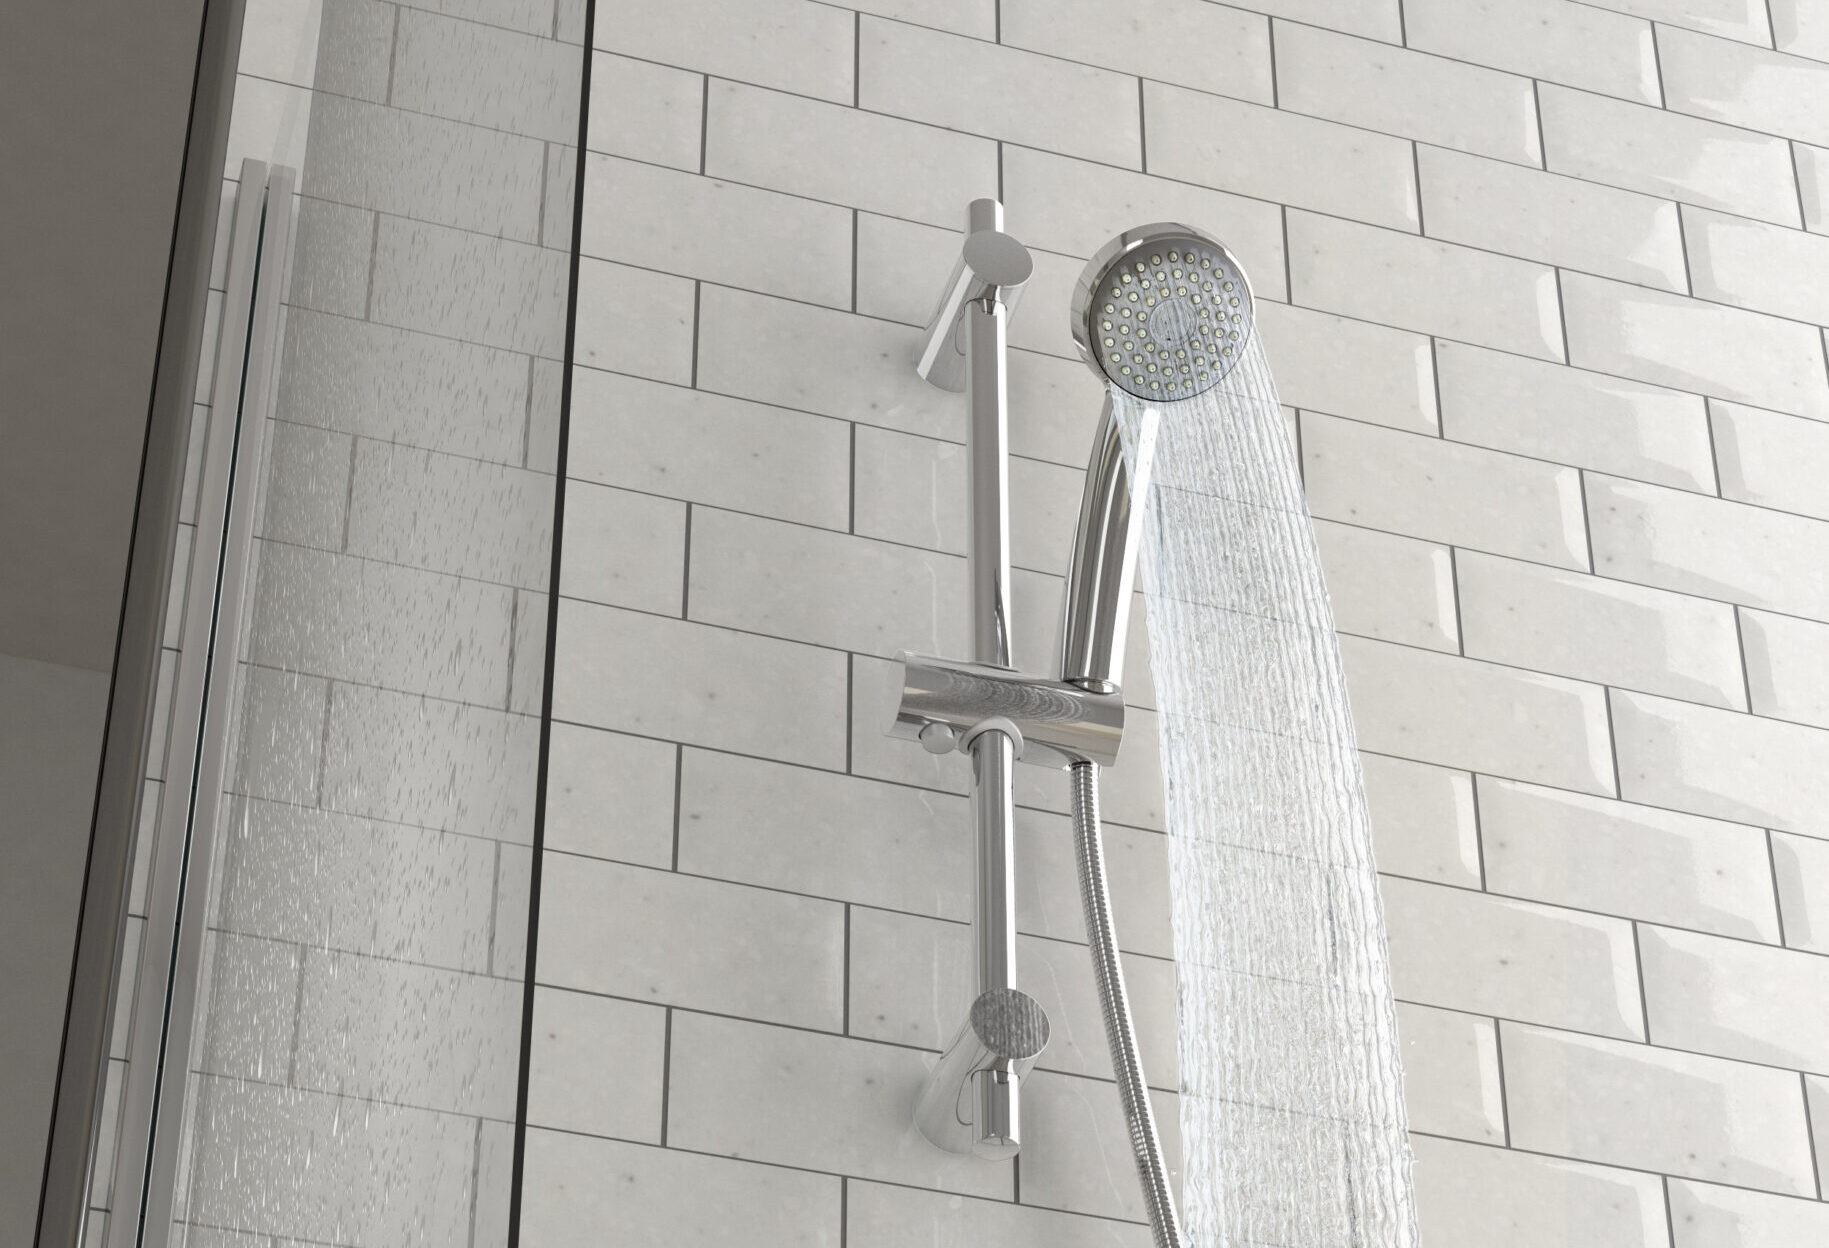 Rhino expands product range to offer showers